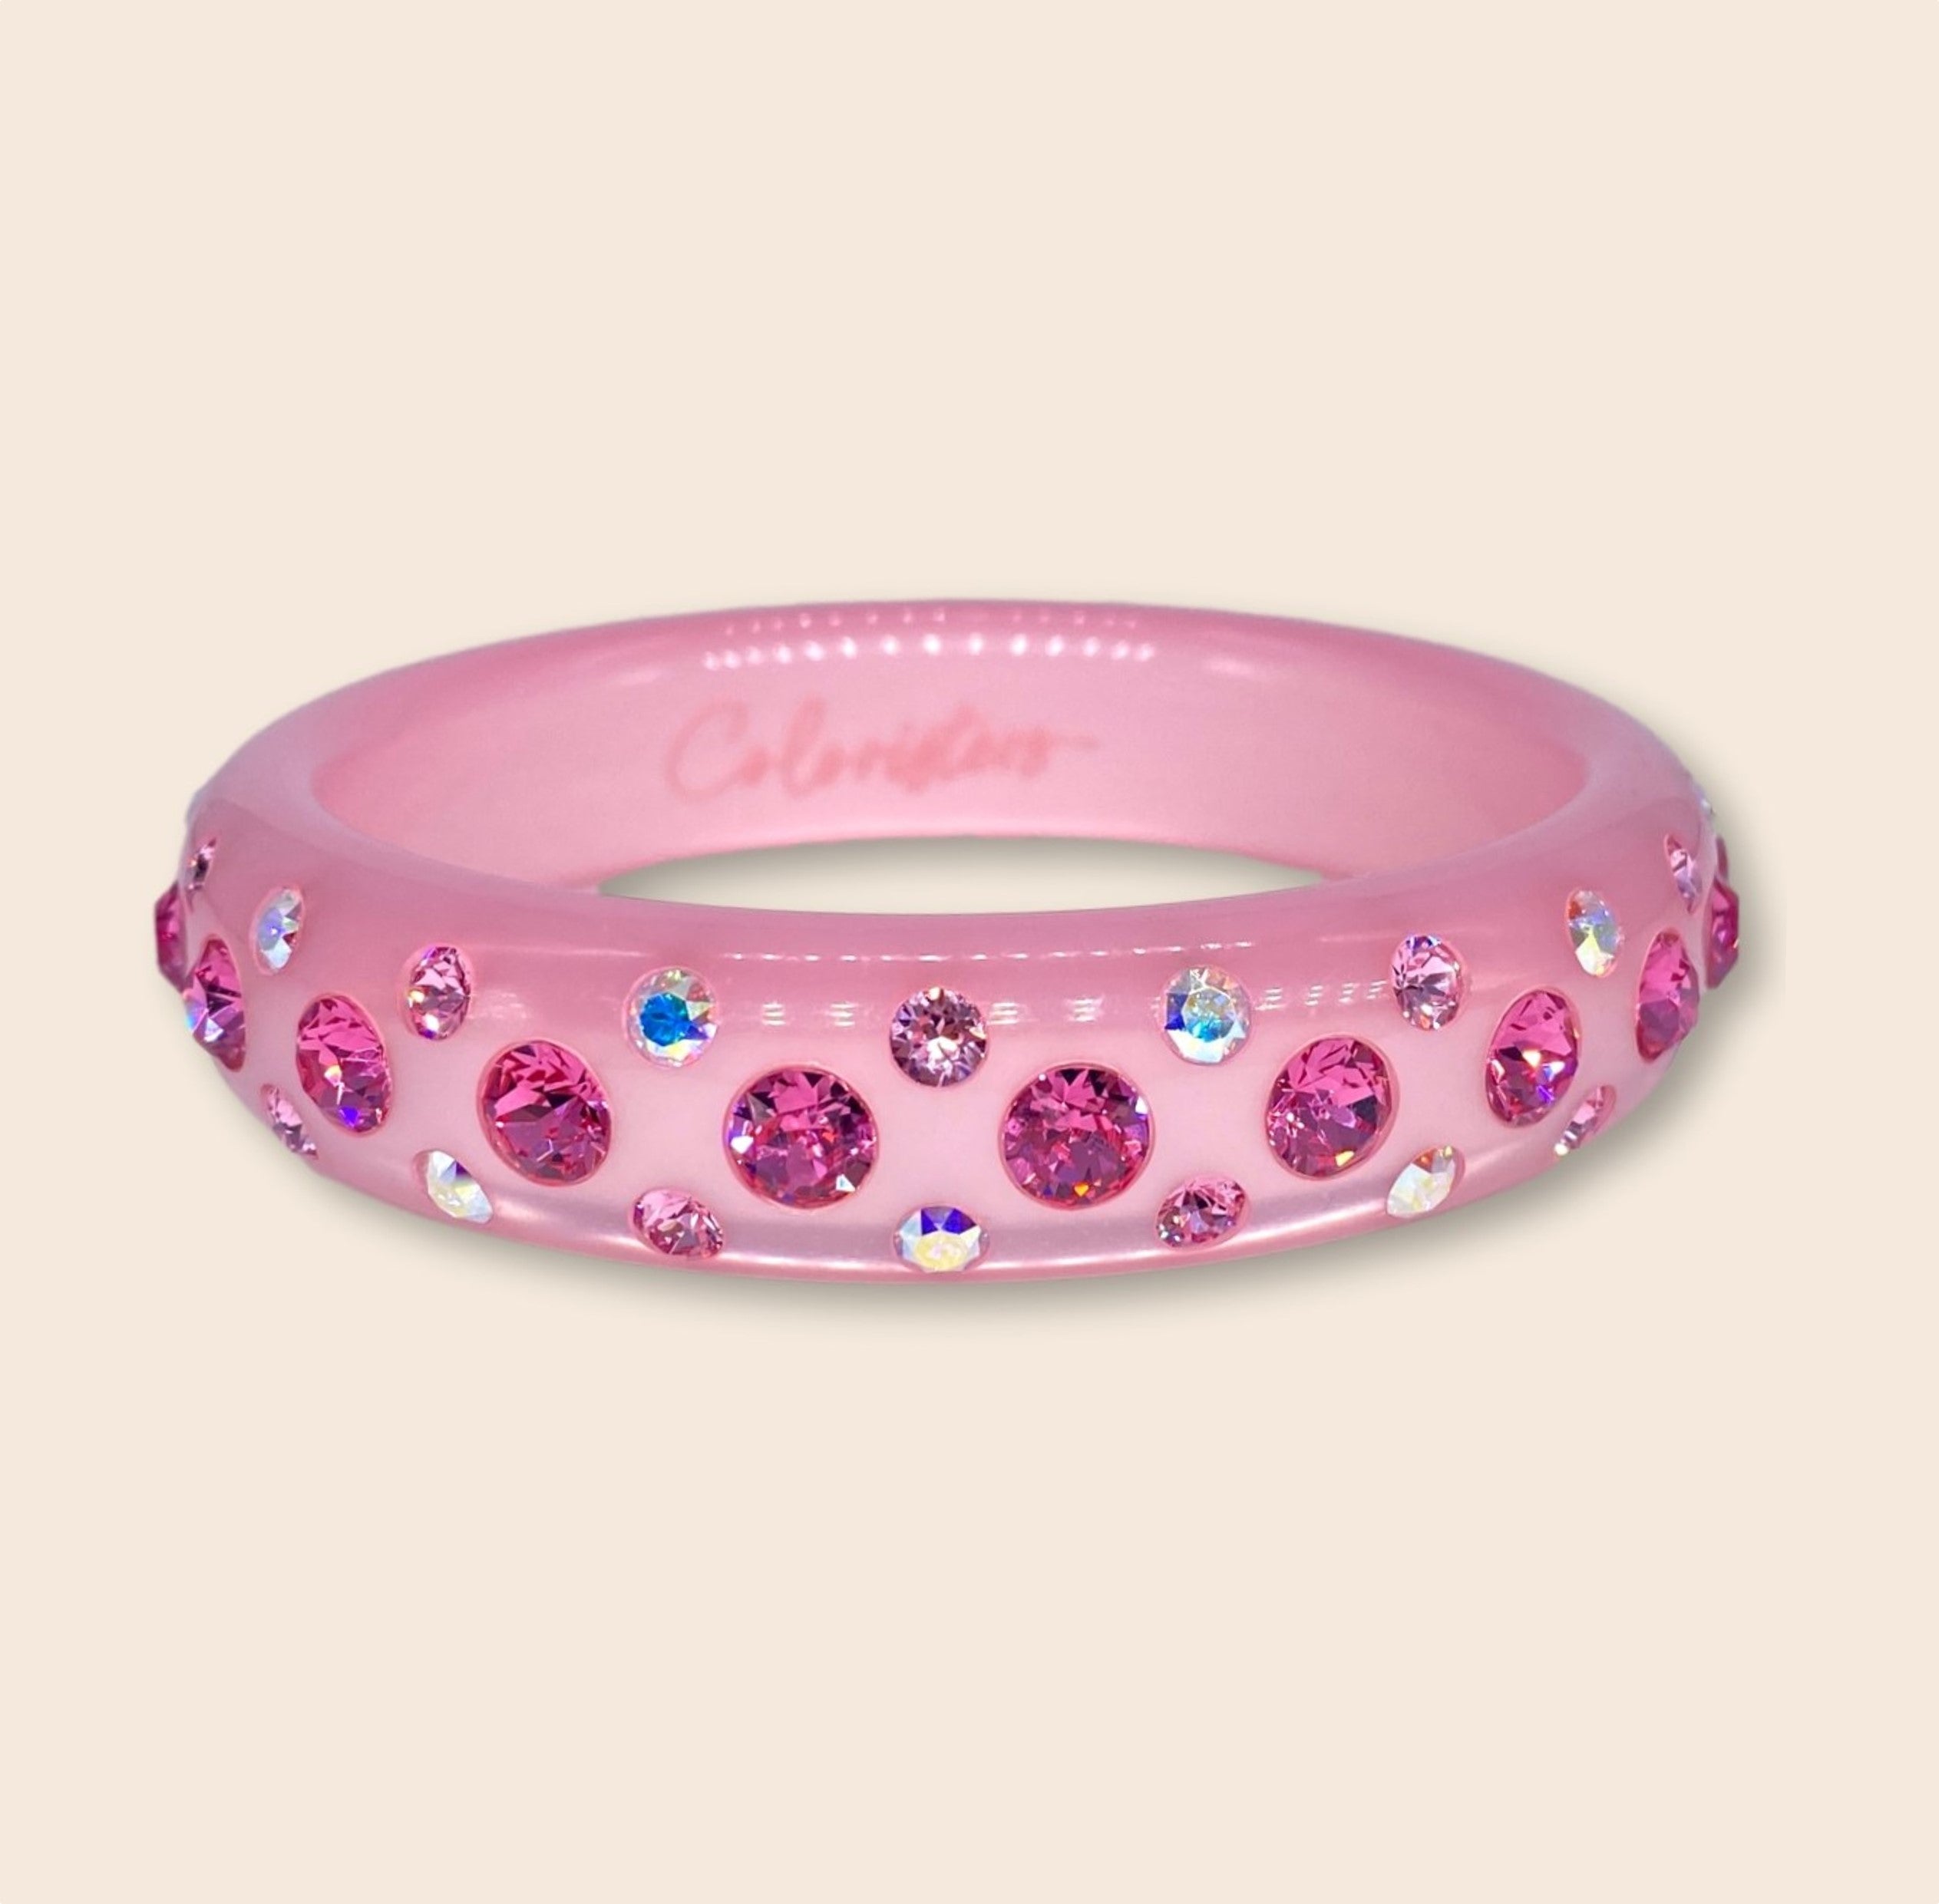 Rosa Coloristers Armreifen mit Kristallen in Coloristers Bangle with crystals in pink.